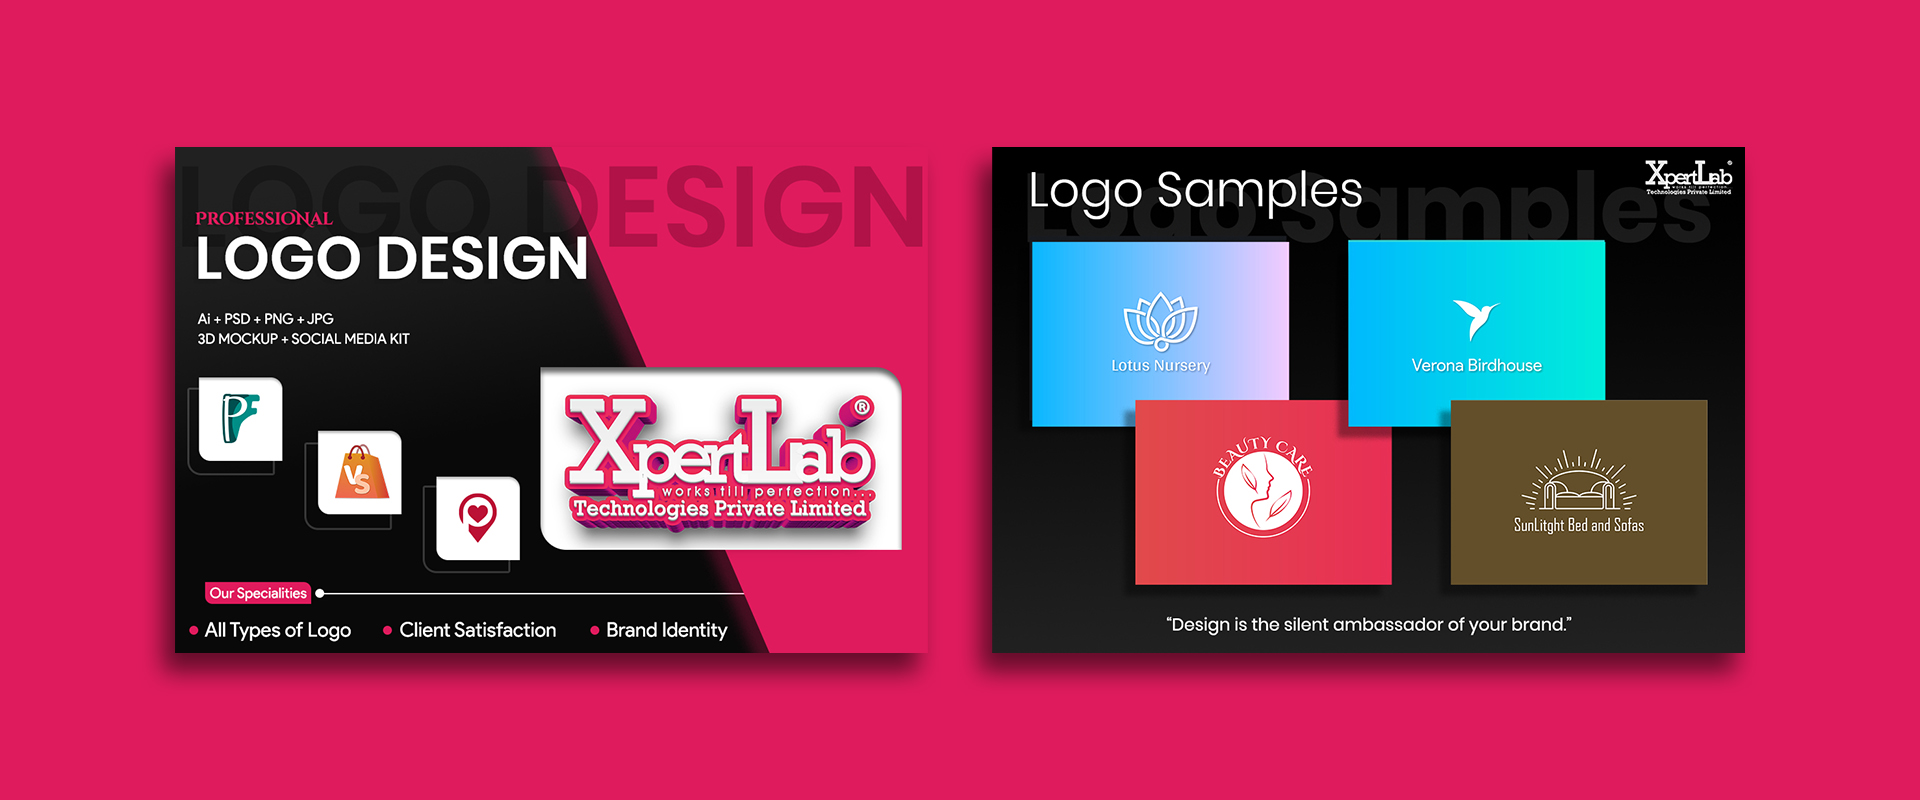 xpertlab technologies private limited - logo designing company in junagadh